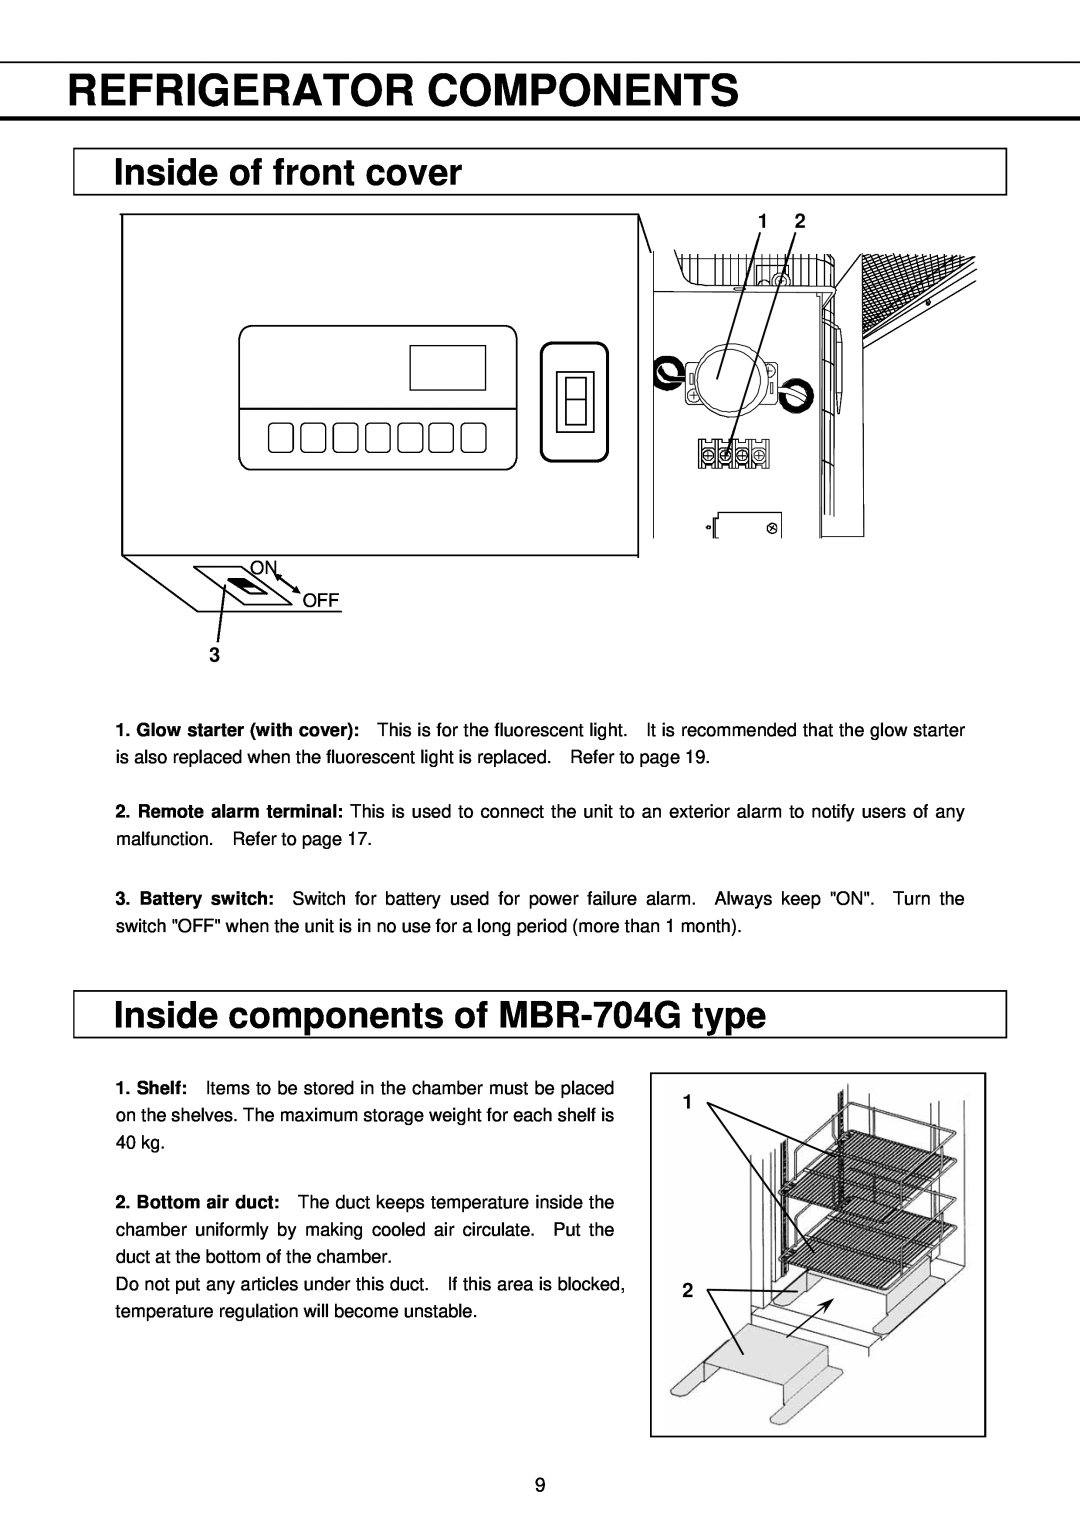 Sanyo MBR-704GR instruction manual Inside of front cover, Inside components of MBR-704Gtype, Refrigerator Components 